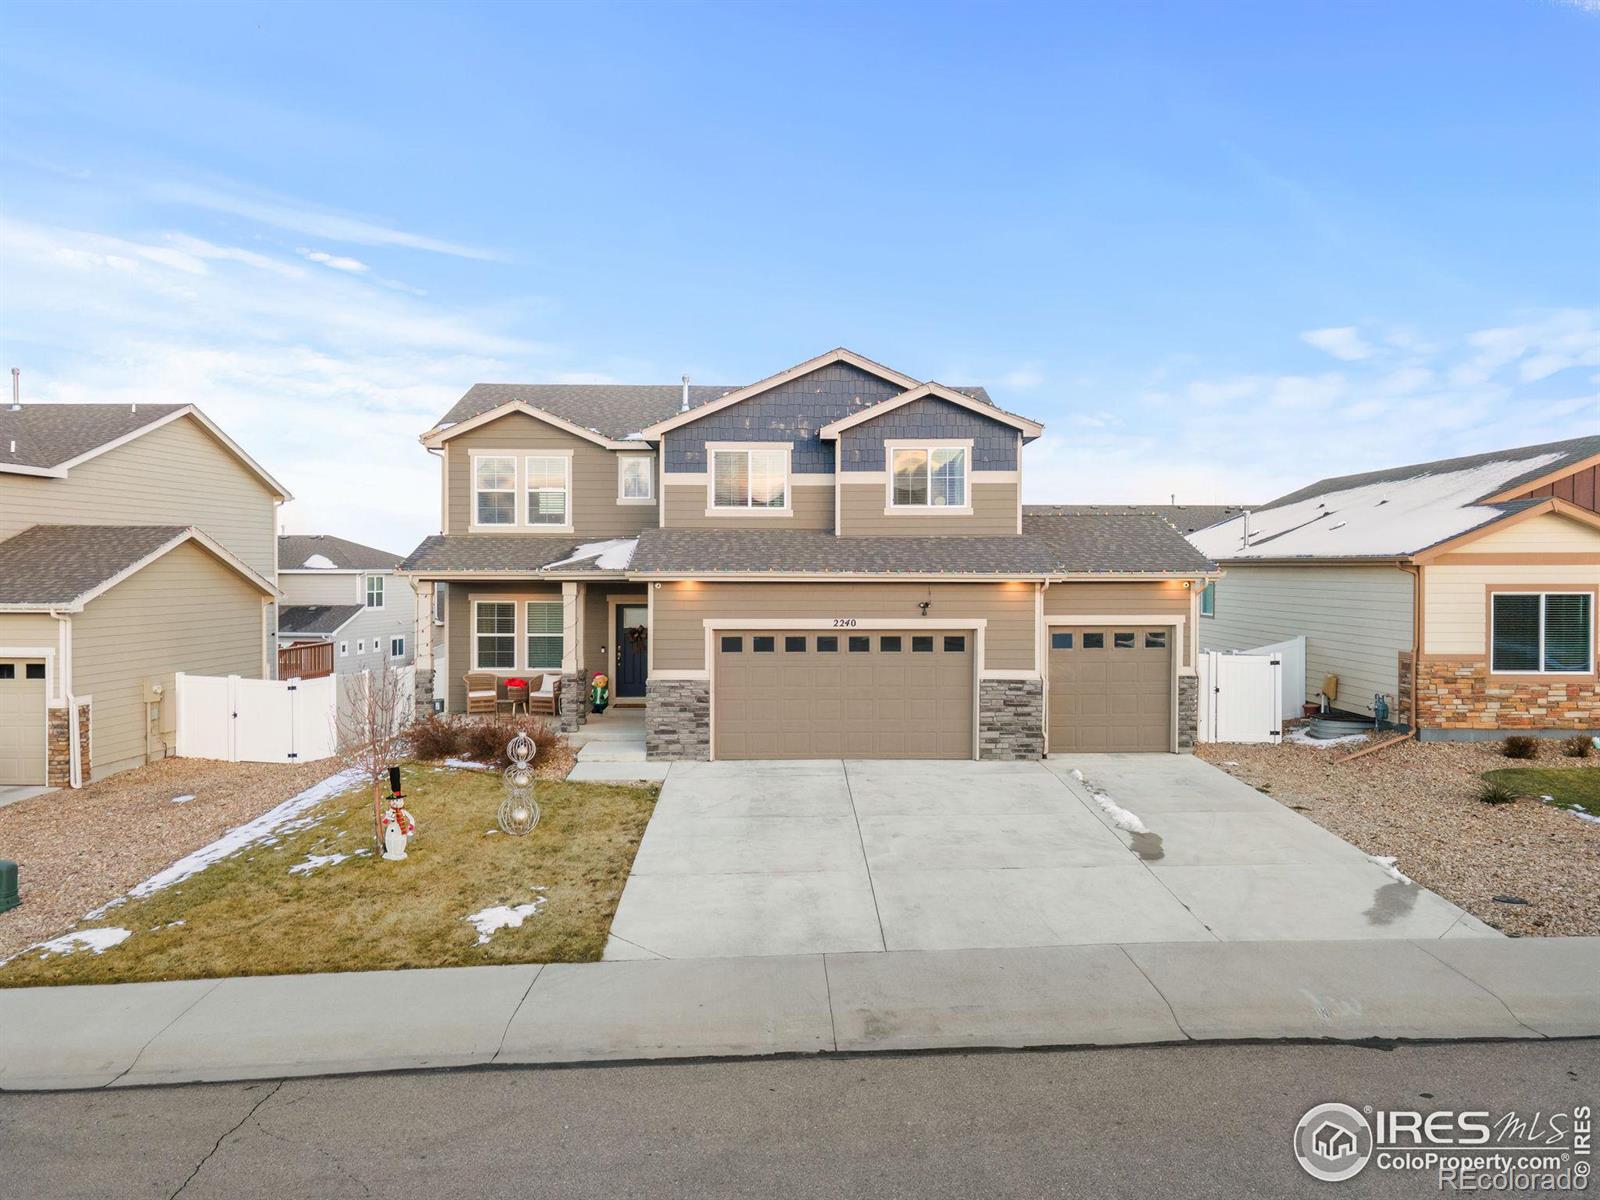 2240  75th Avenue, greeley MLS: 4567891000820 Beds: 5 Baths: 4 Price: $535,000